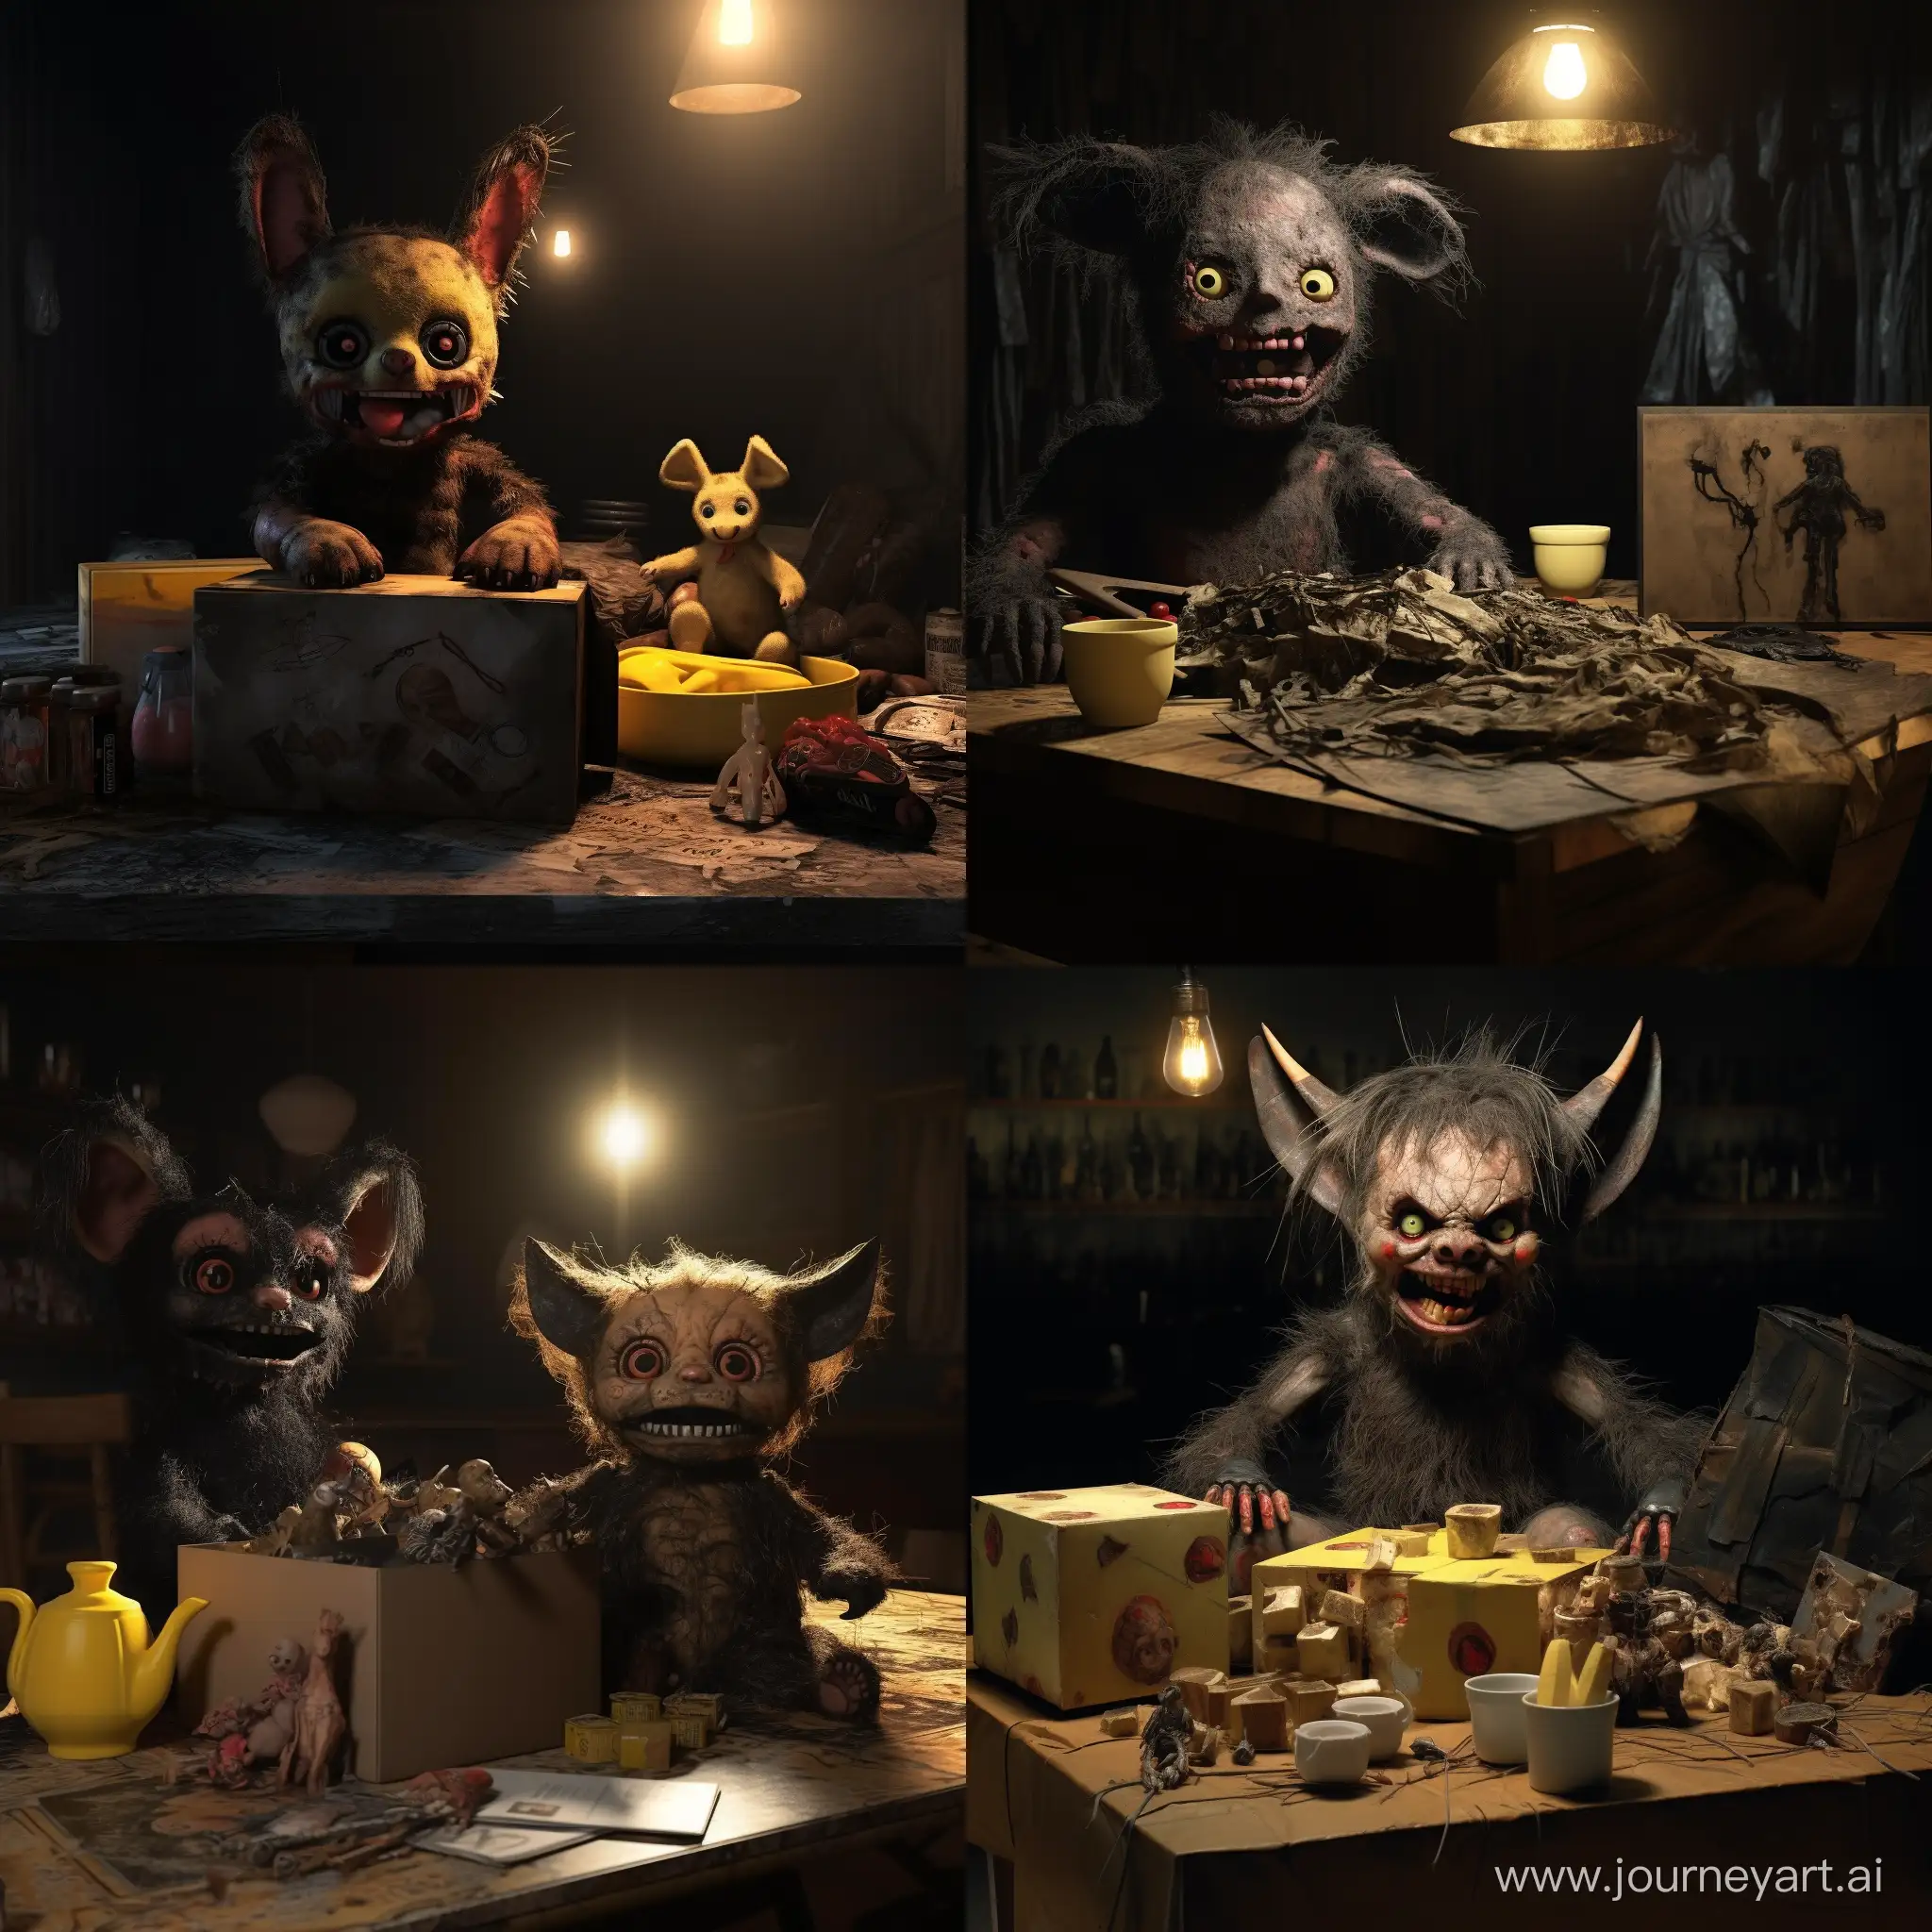 Creepy-Demon-Doll-Surrounded-by-Stuffed-Animals-on-Table-Hyper-Realism-8K-Image